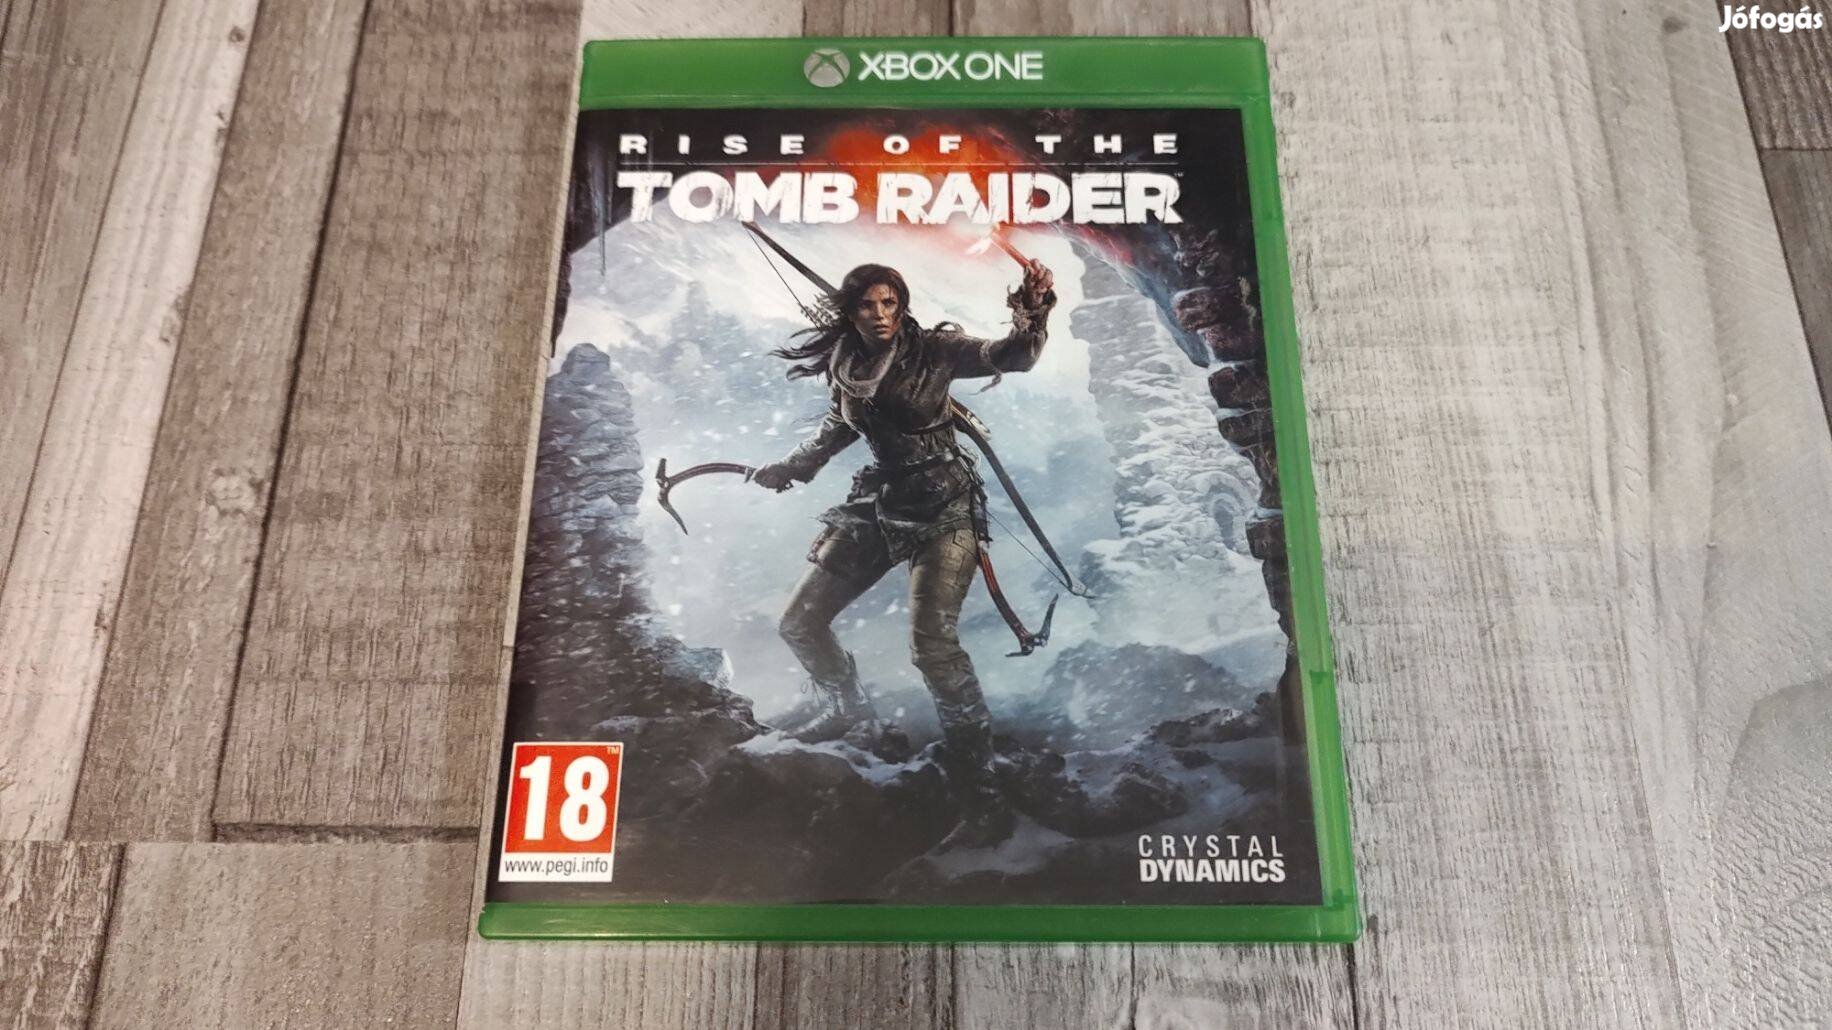 Xbox One(S/X)-Series X : Rise Of The Tomb Raider